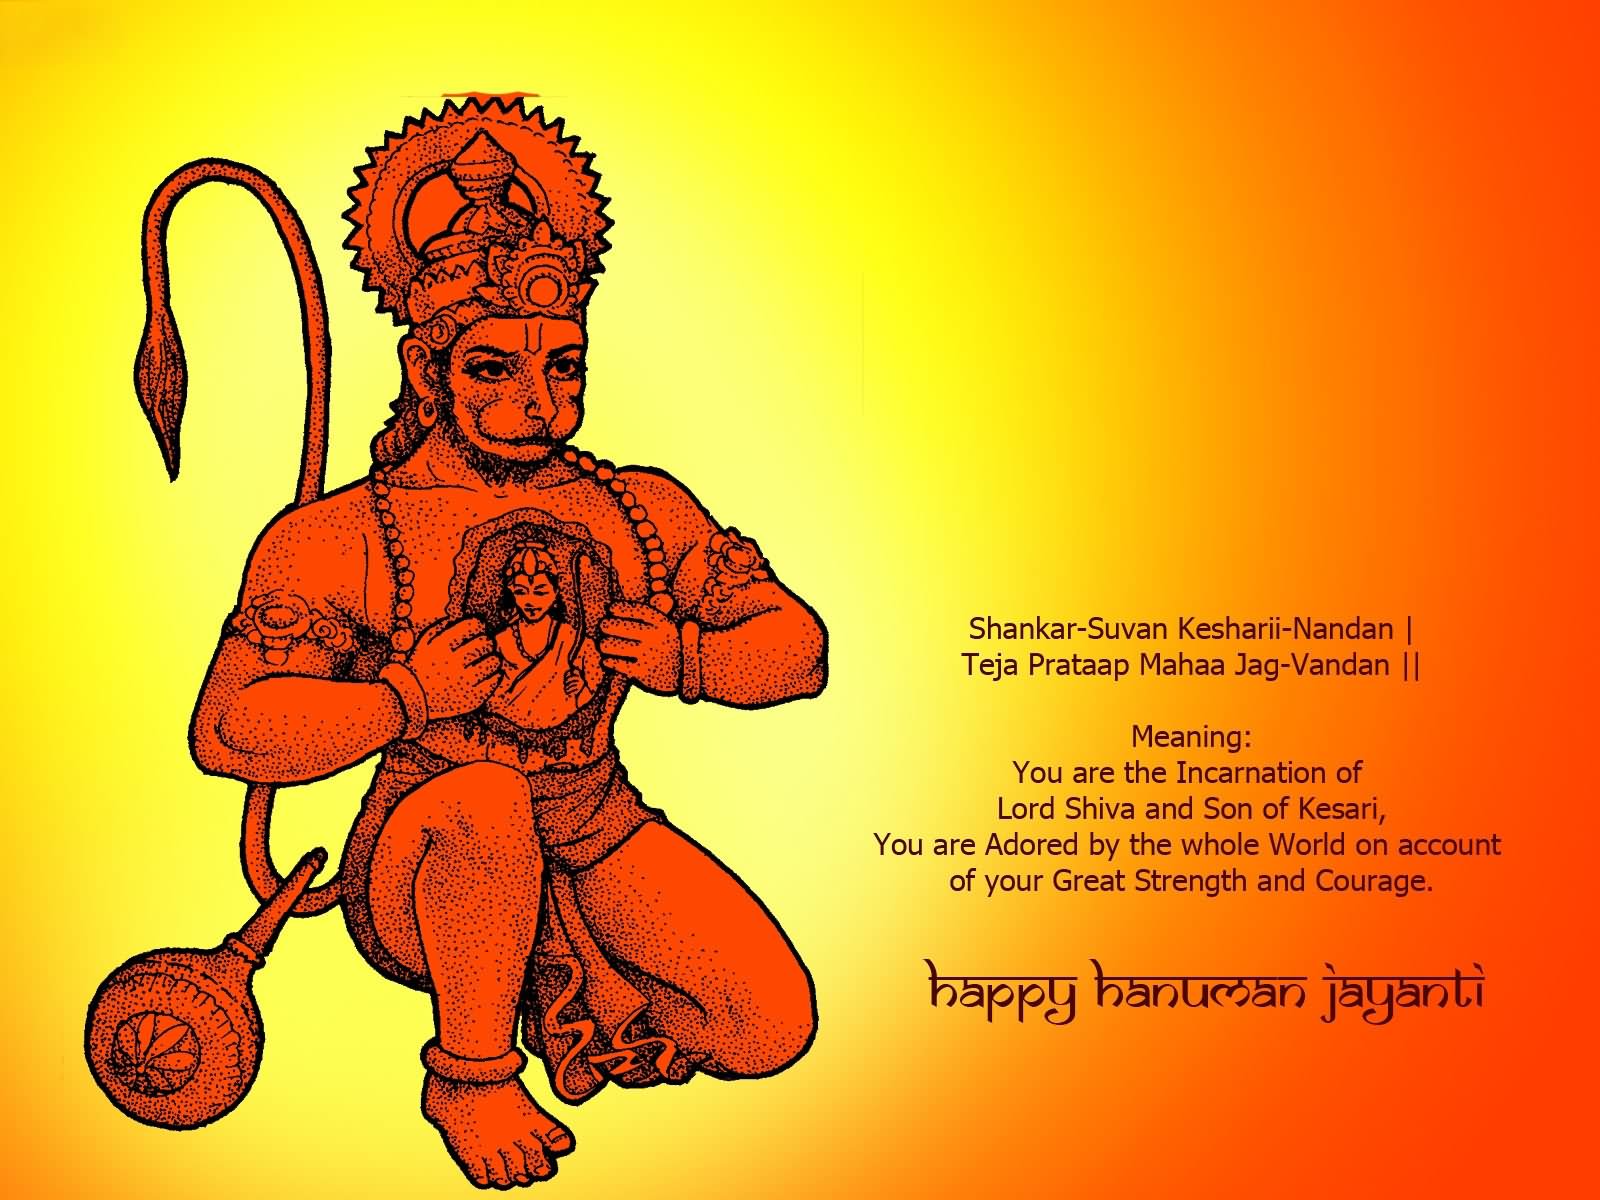 Happy Hanuman Jayanti Wishes To You And Your Family